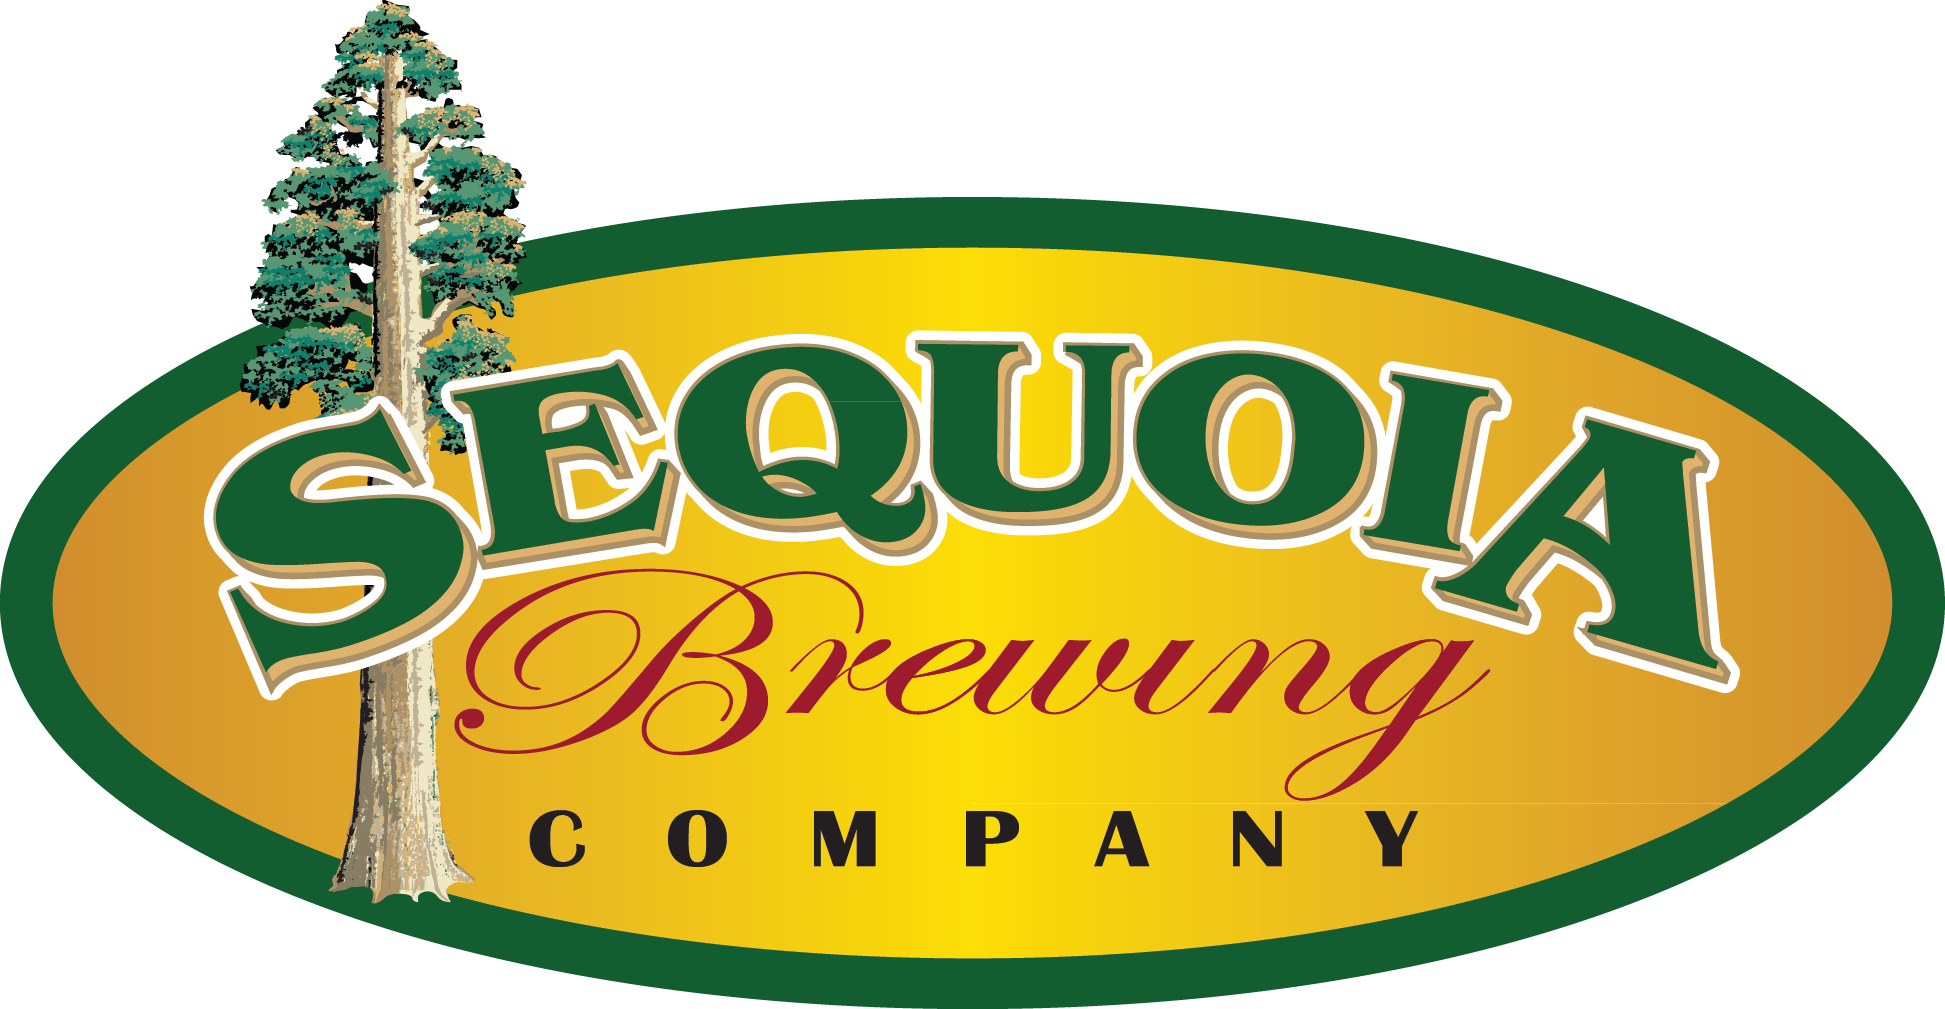 Sequoia Brewing 1 - Sequoia Brewing Company (1945x1009)